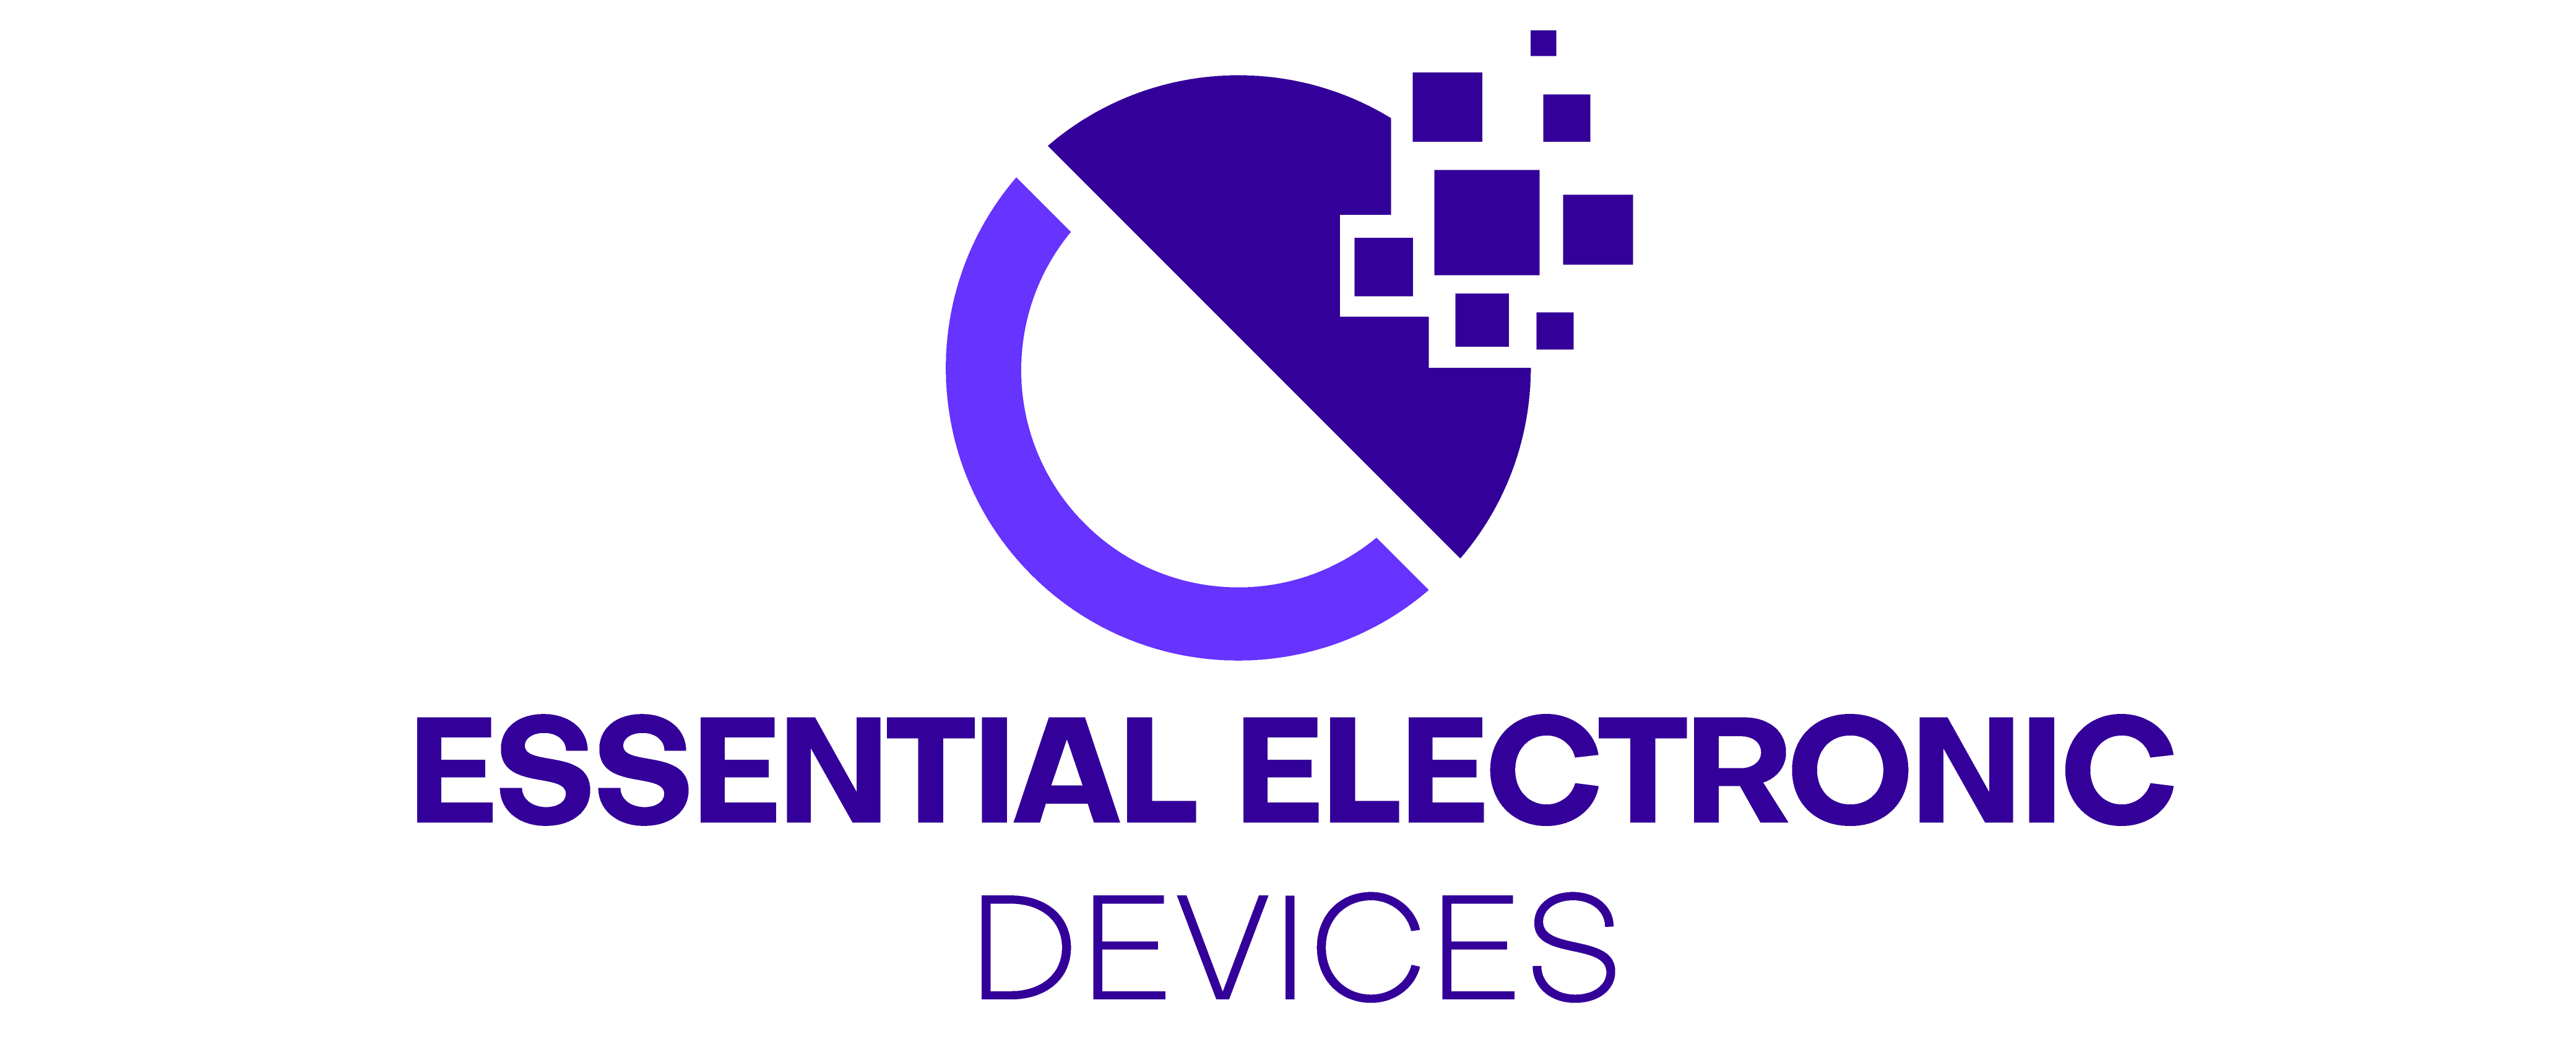 Essential Electronic Devices